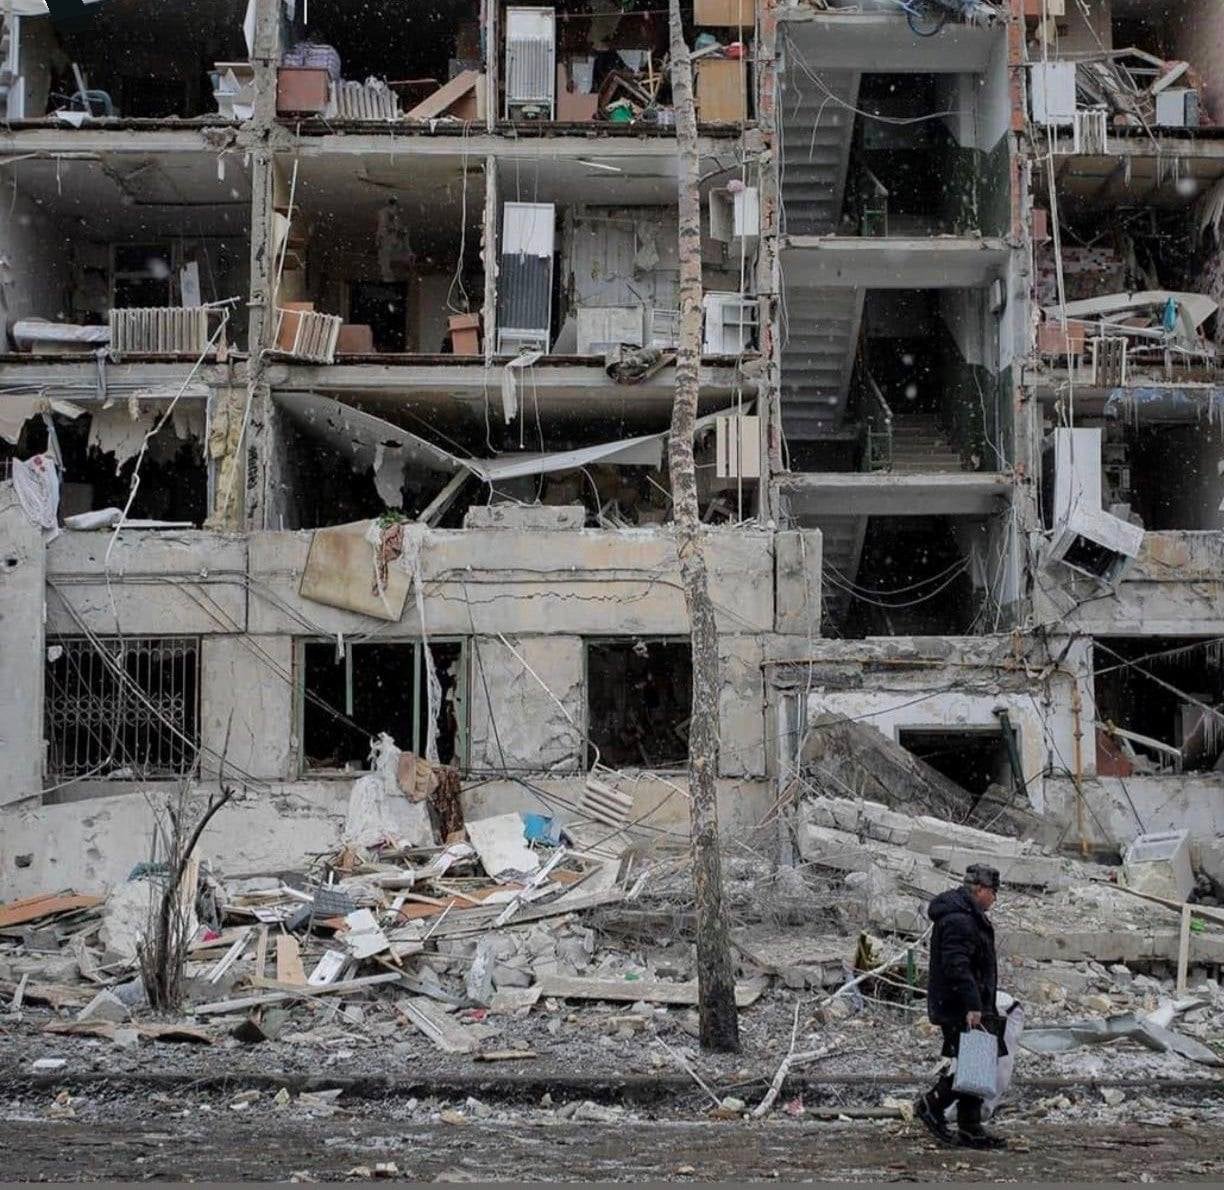 Ukraine news - live: Russia ‘sees no sign of breakthrough’ in peace talks, as UN says 4 million have fled war